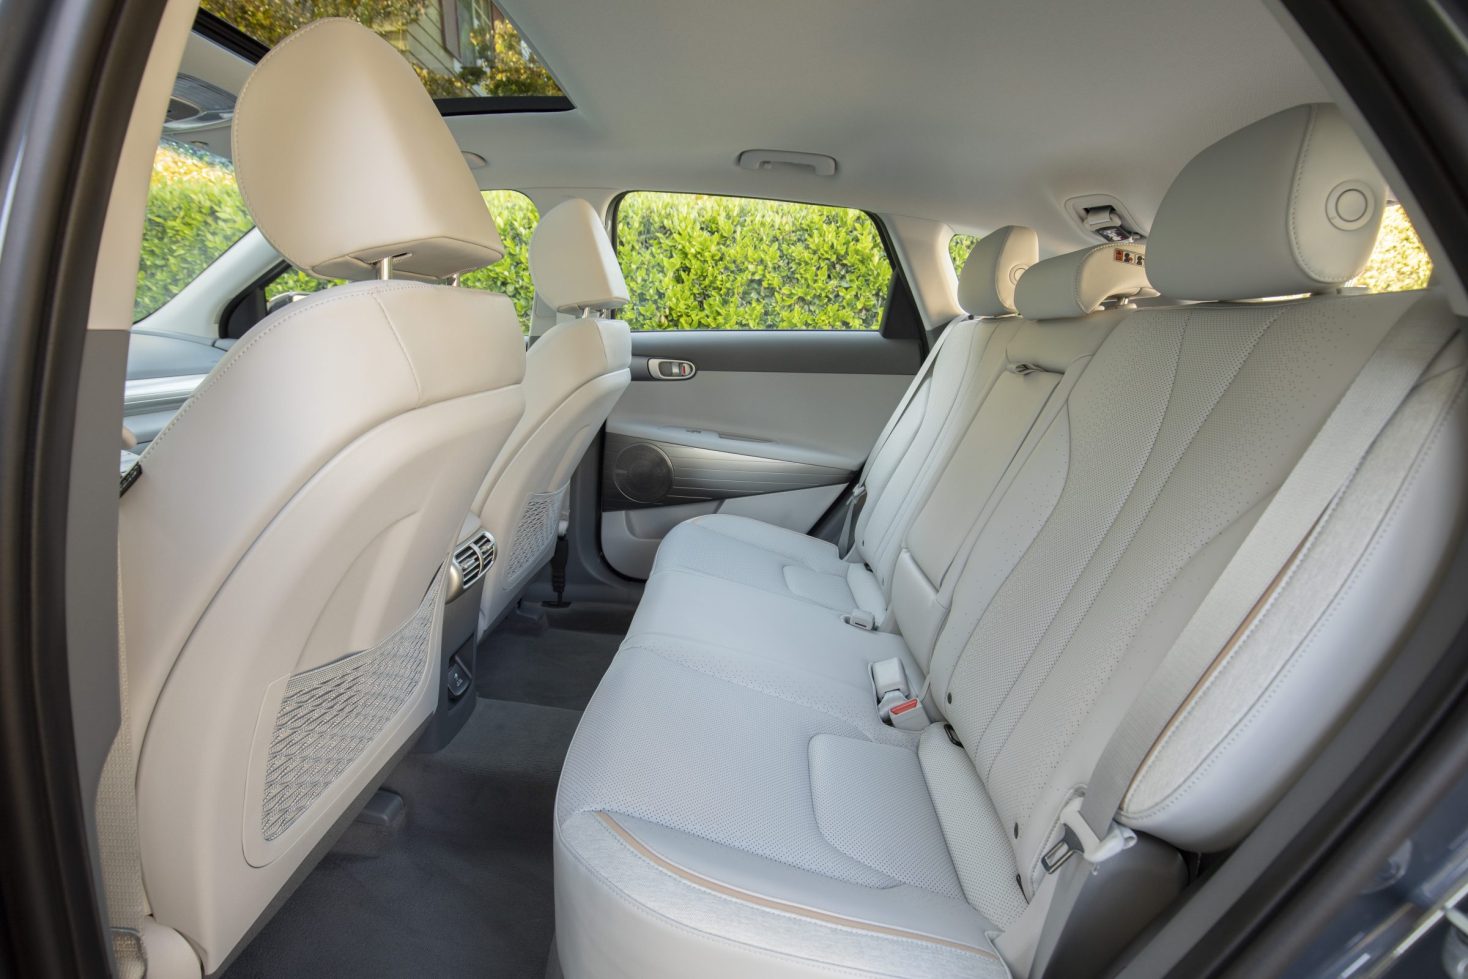 What is Hyundai’s Bio-based H-Tex Seating Surfaces?